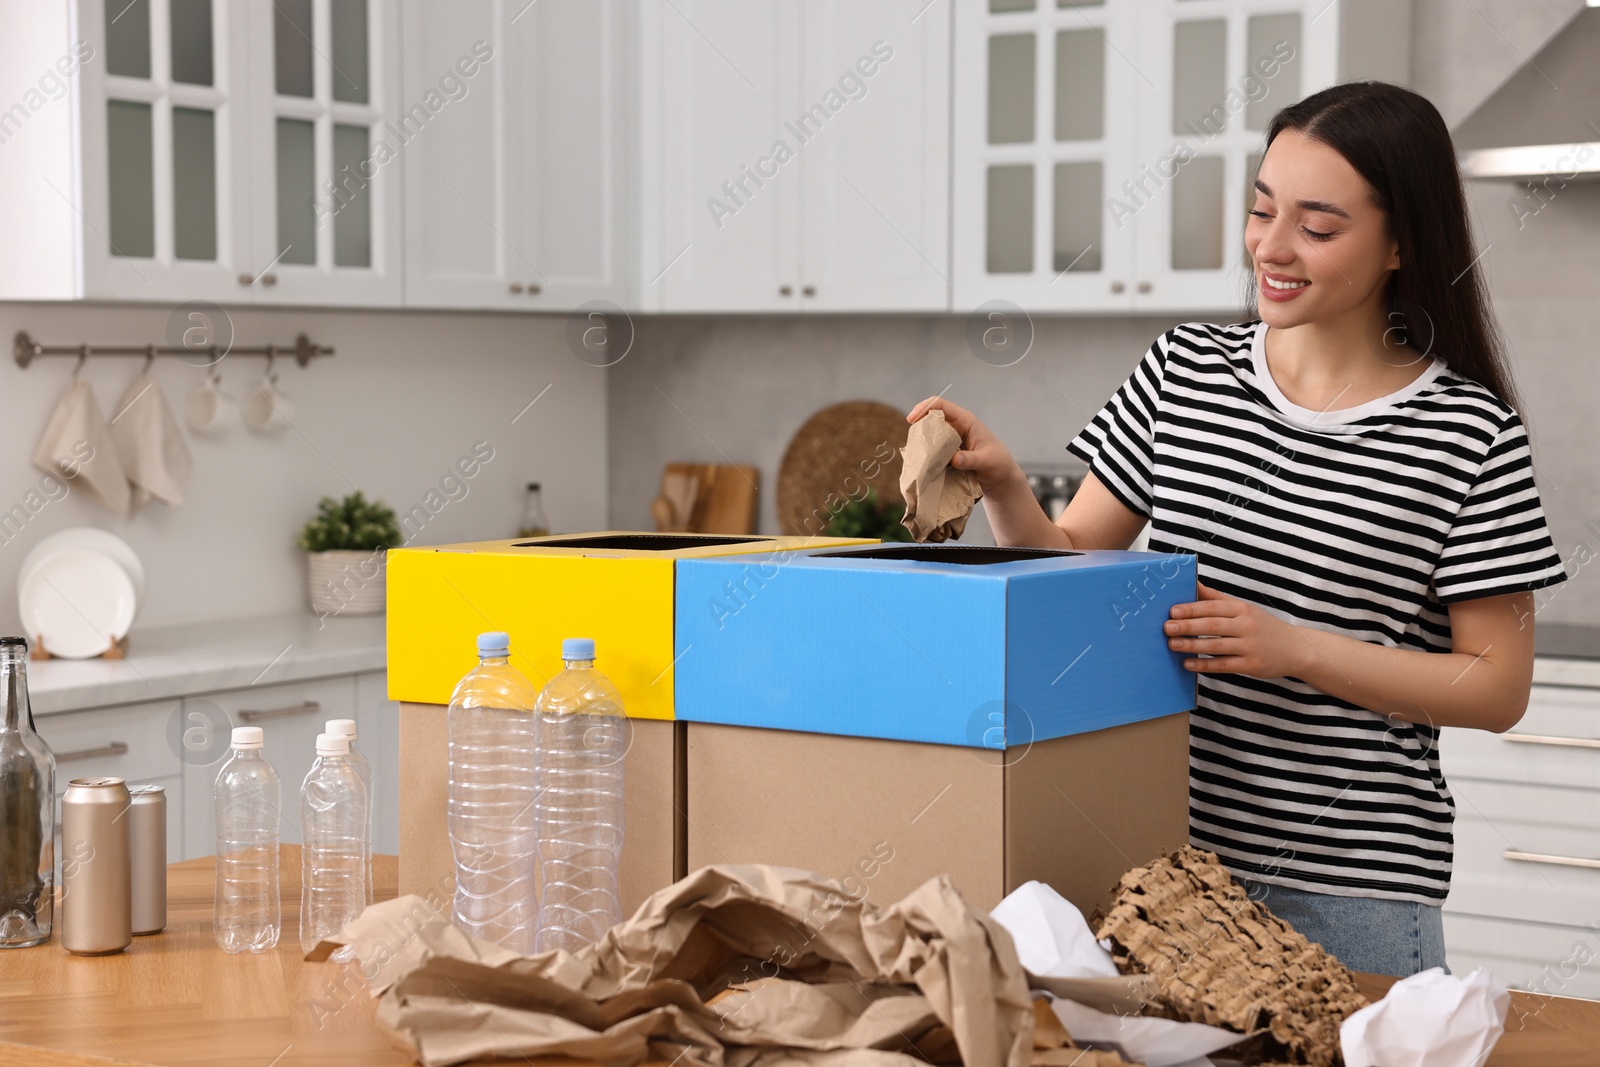 Photo of Garbage sorting. Smiling woman throwing crumpled paper into cardboard box in kitchen